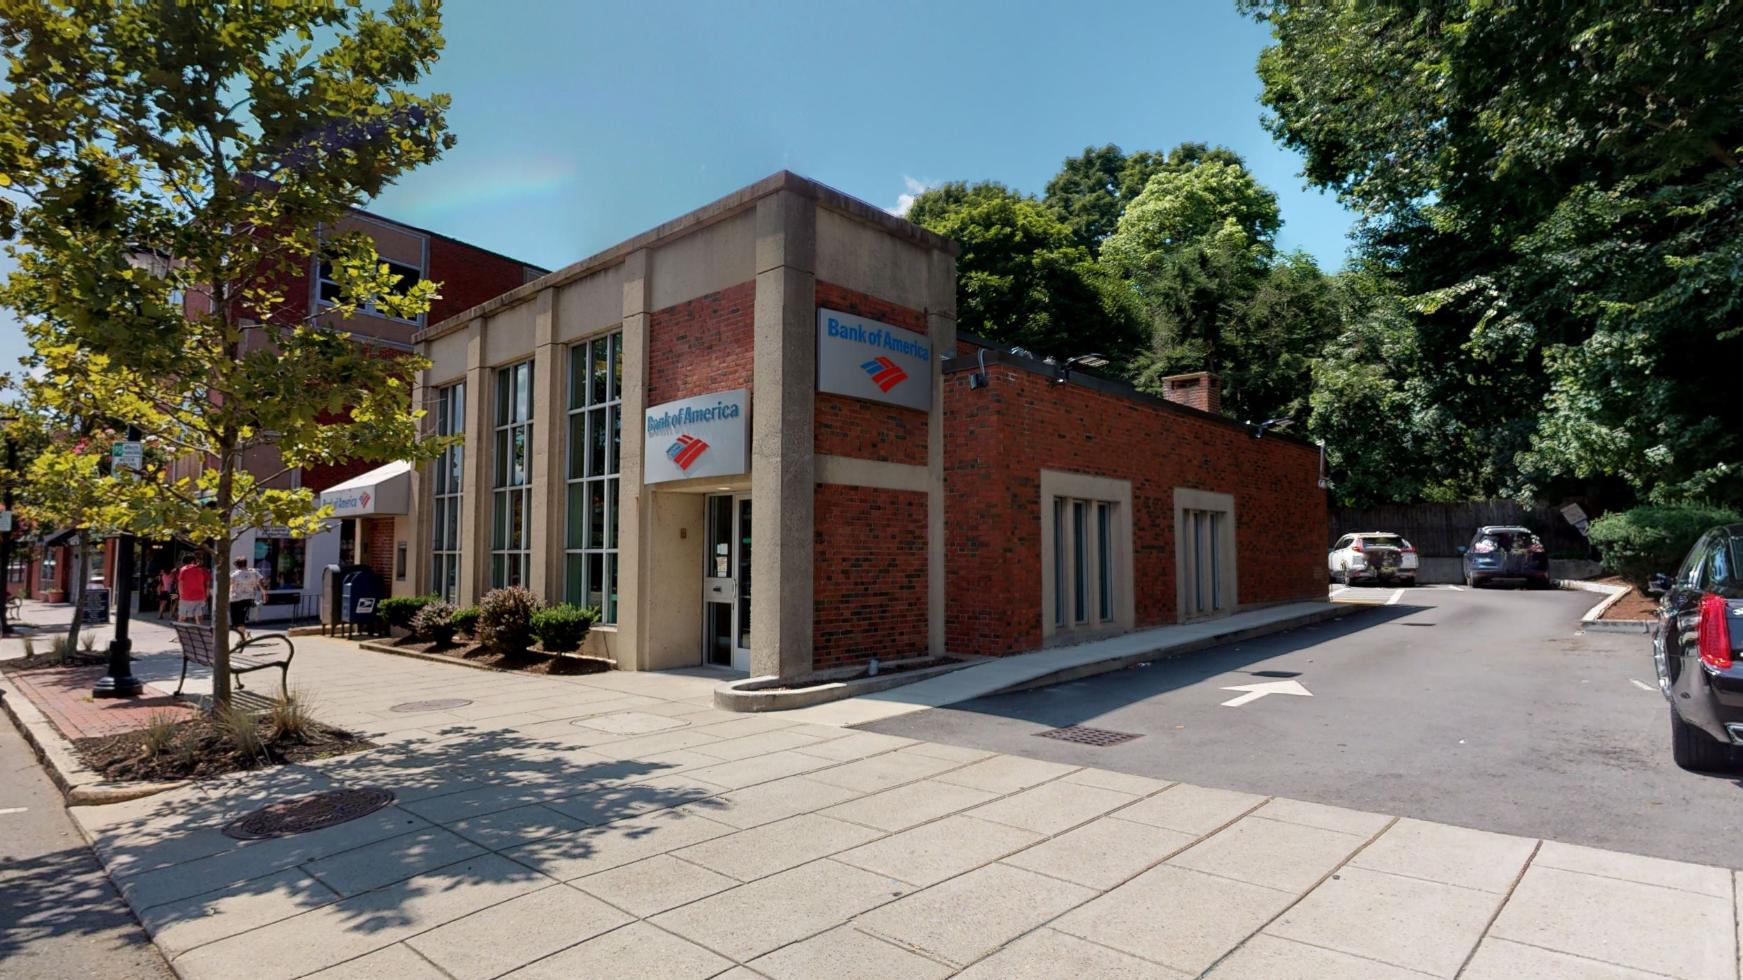 Bank of America financial center with walk-up ATM | 72 Leonard St, Belmont, MA 02478